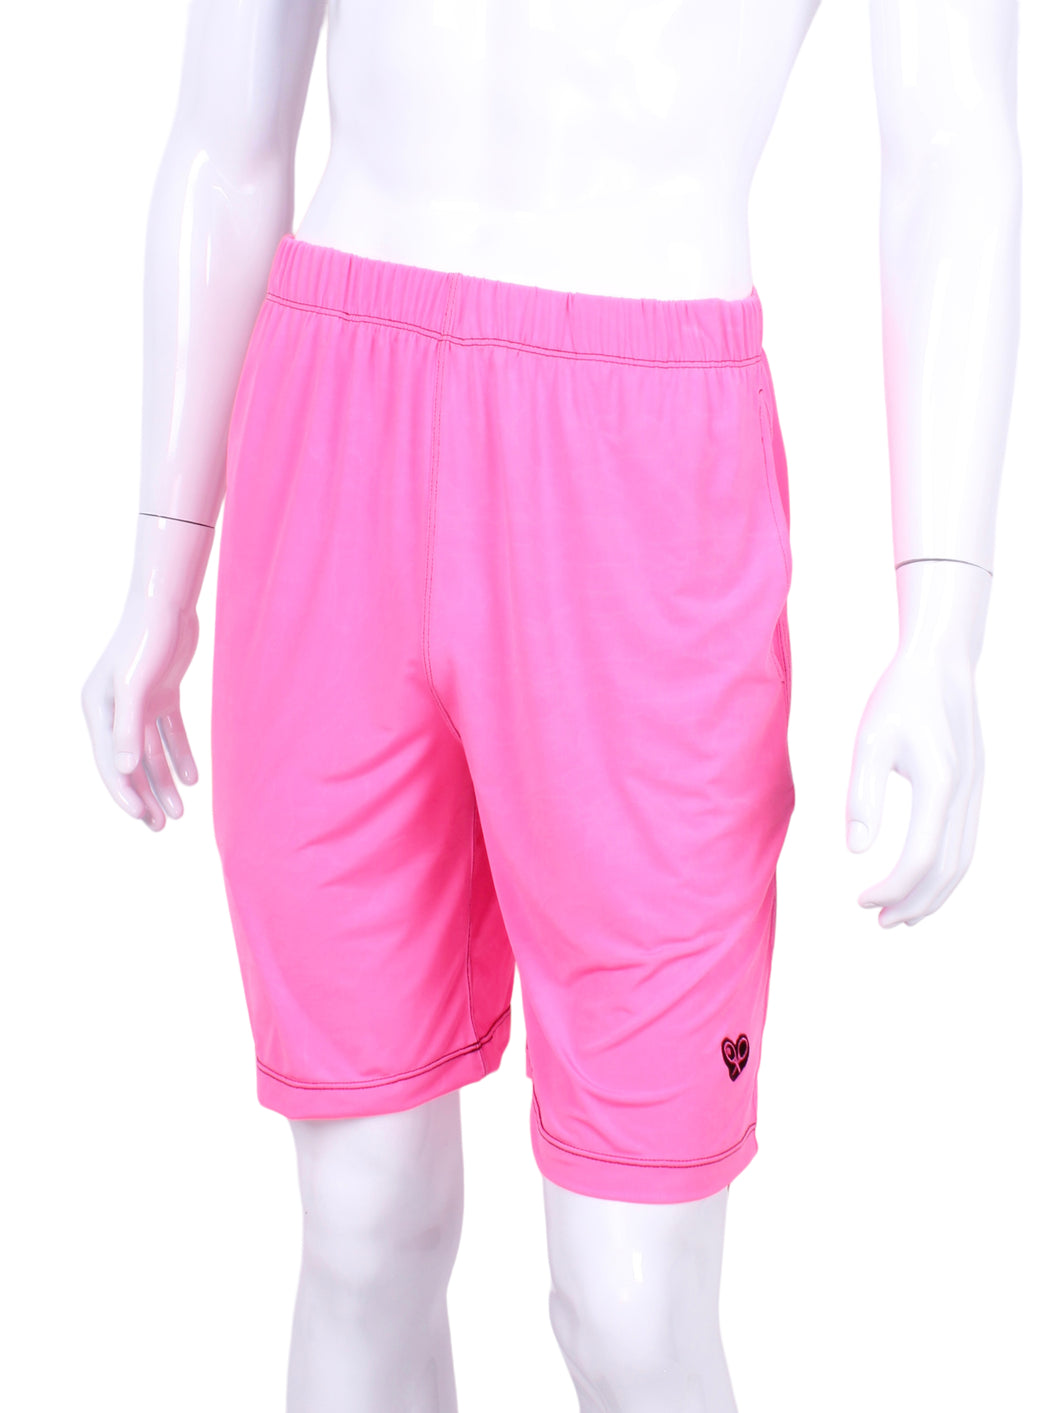 The American Men’s Shorts Pink